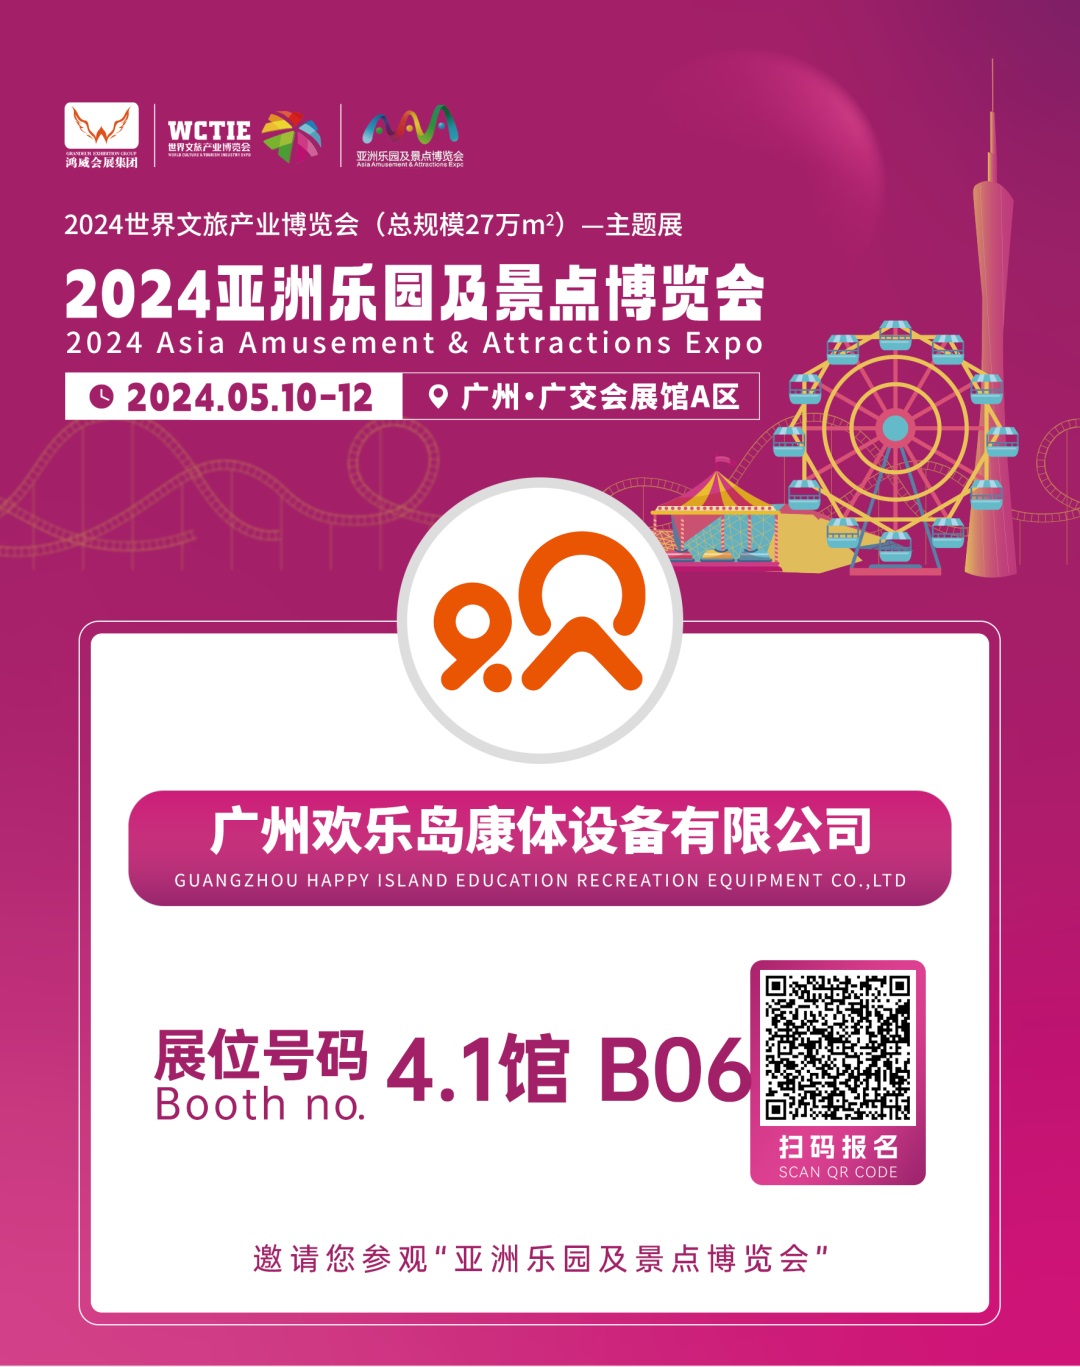 2024 Asia Amusement & Attractions Expo.